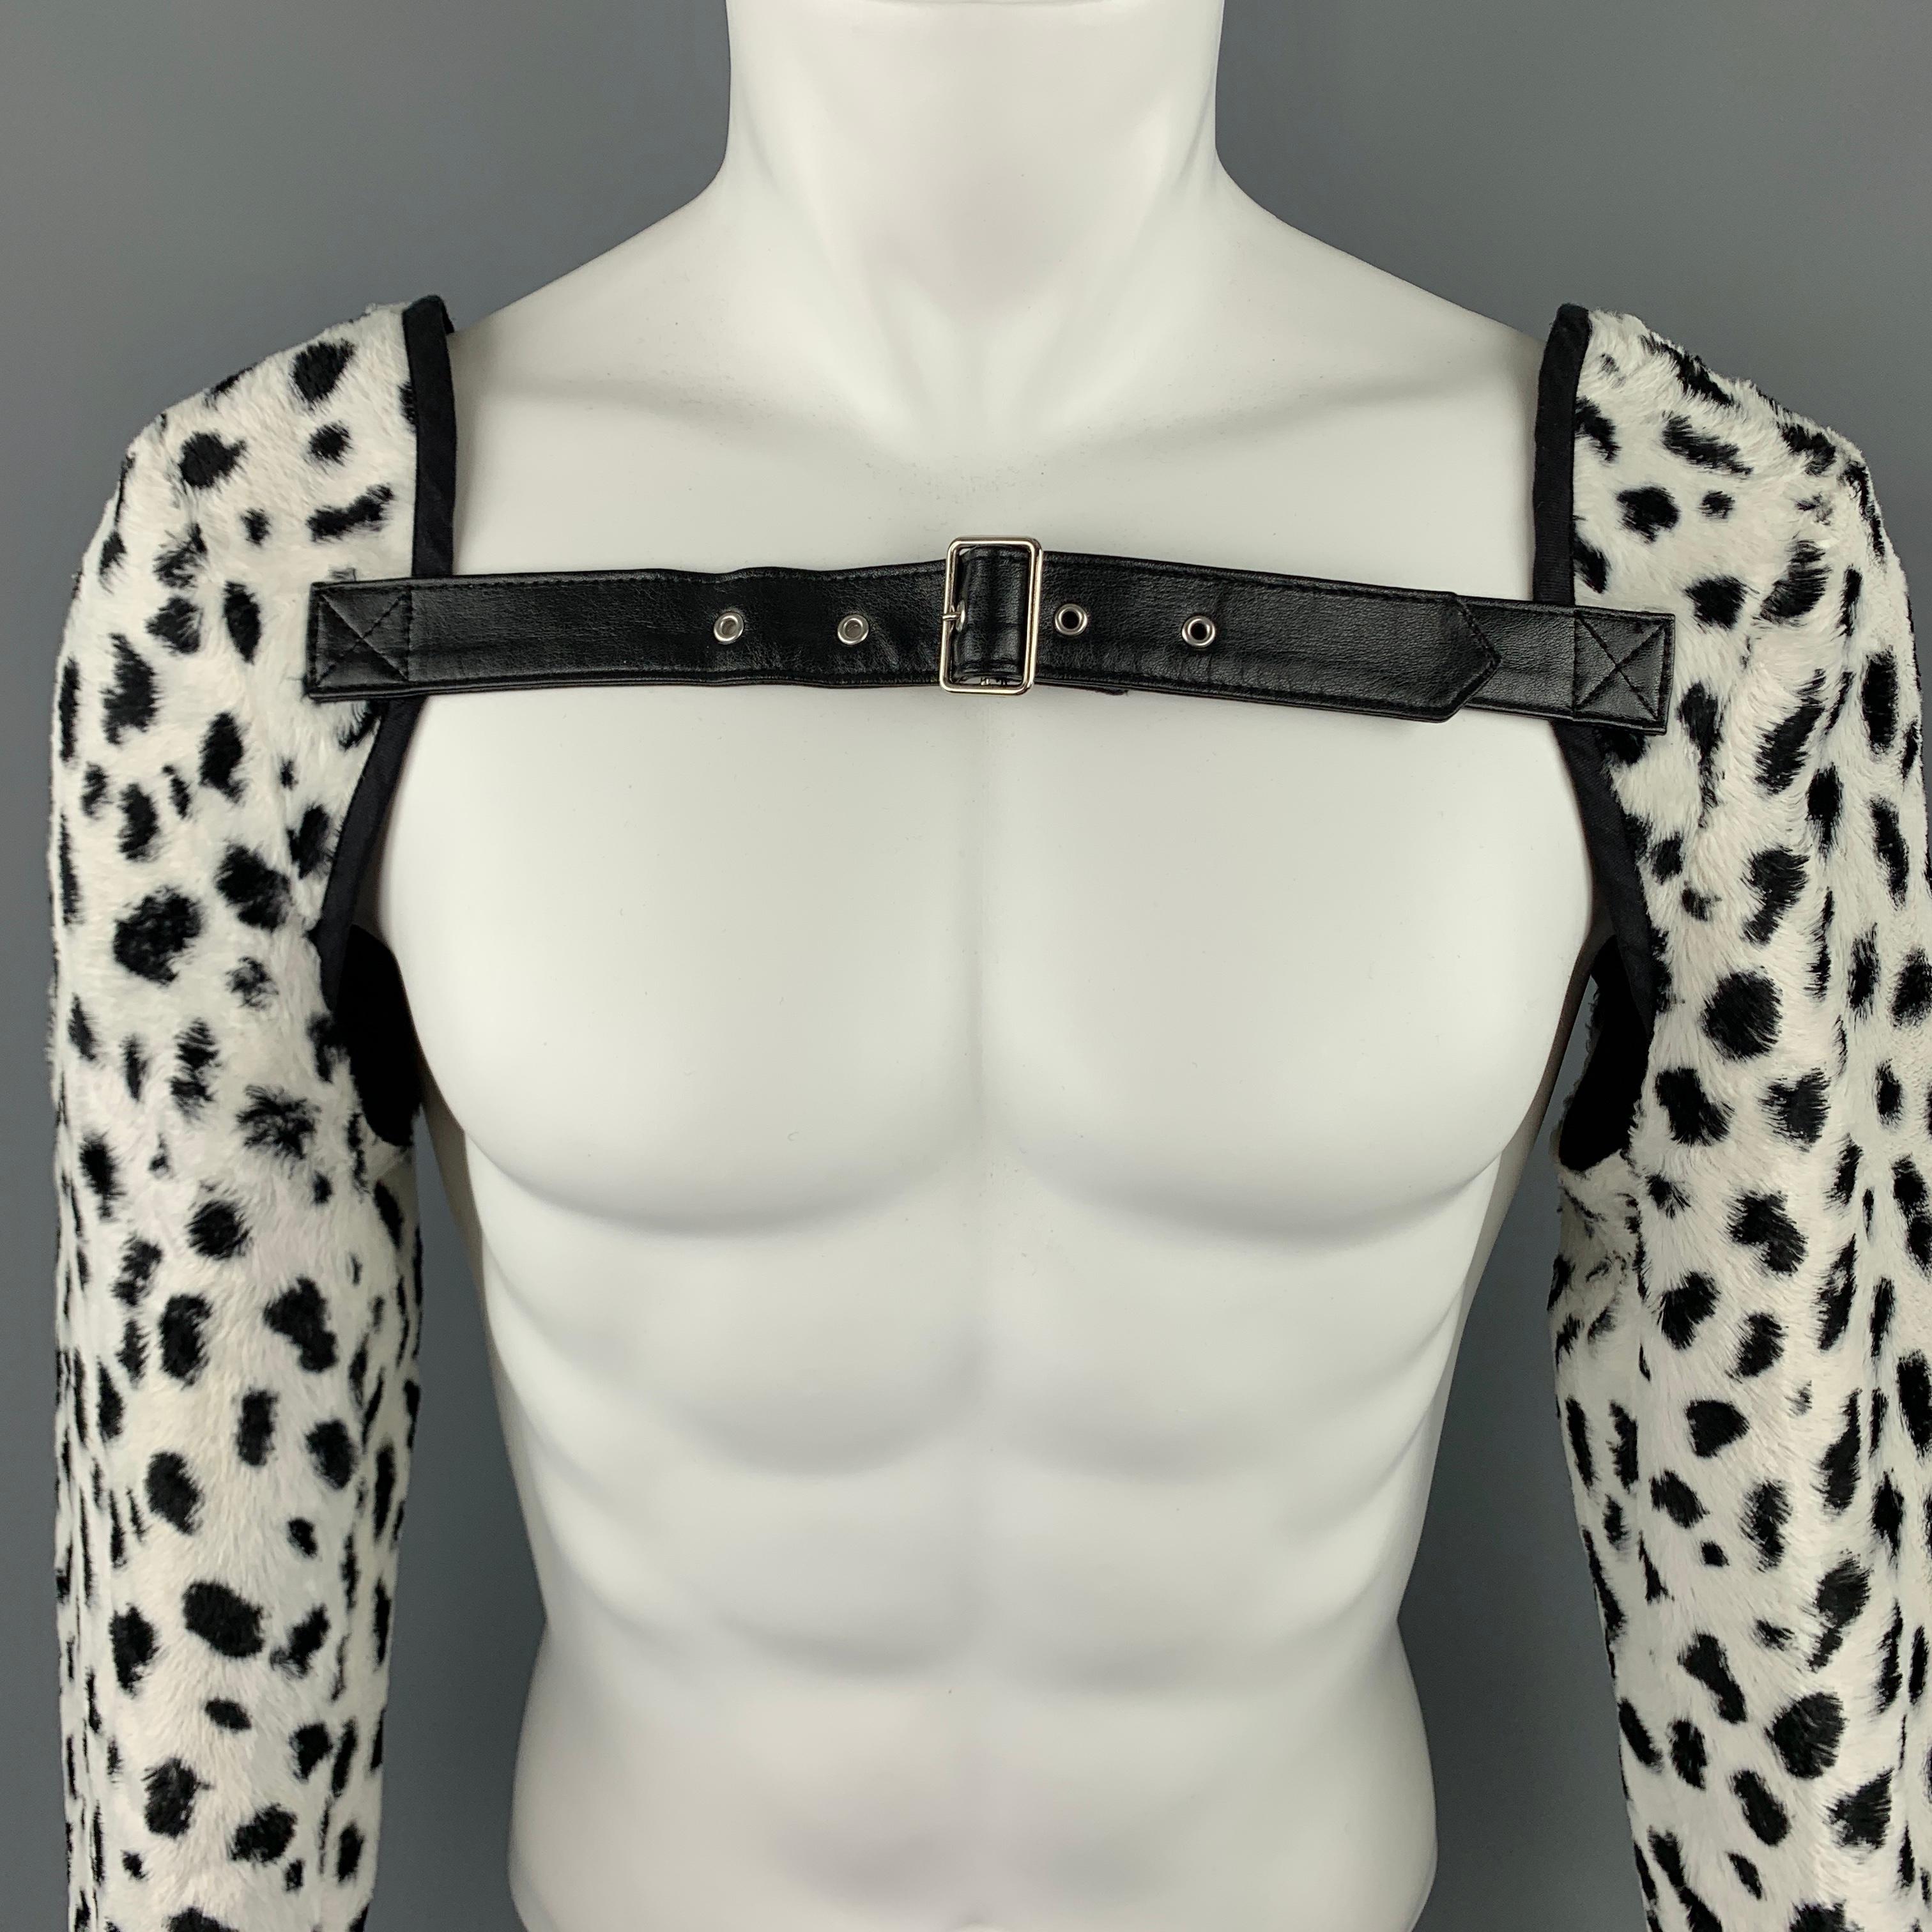 COMME des GARCONS HOMME PLUS sleeves harness, in an animal print faux fur rayon material, featuring leather straps and buckles for fitting, with buttoned cuffs and a black trim. Made in Japan.

Excellent Pre-Owned Condition.
Marked: